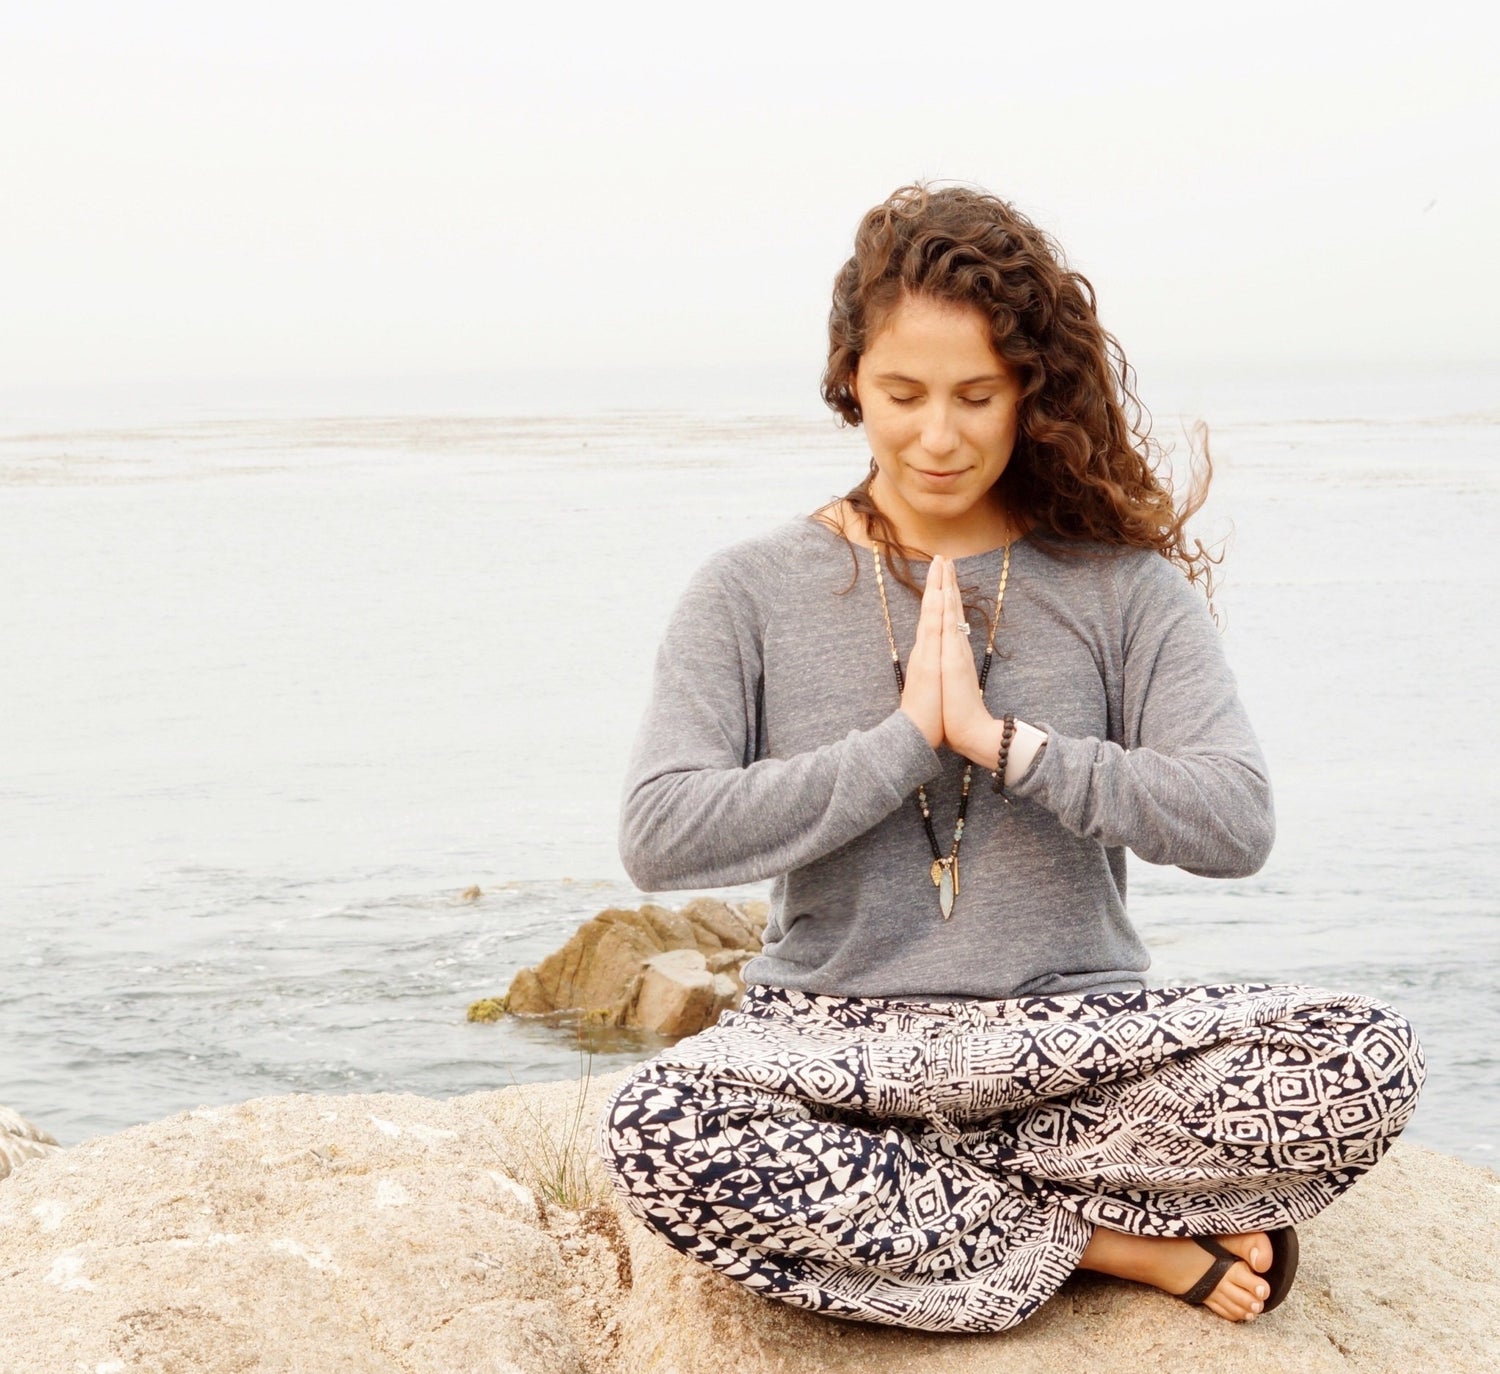 Meditation for Busy Minds - How to Find the Calm | Buddha Pants®